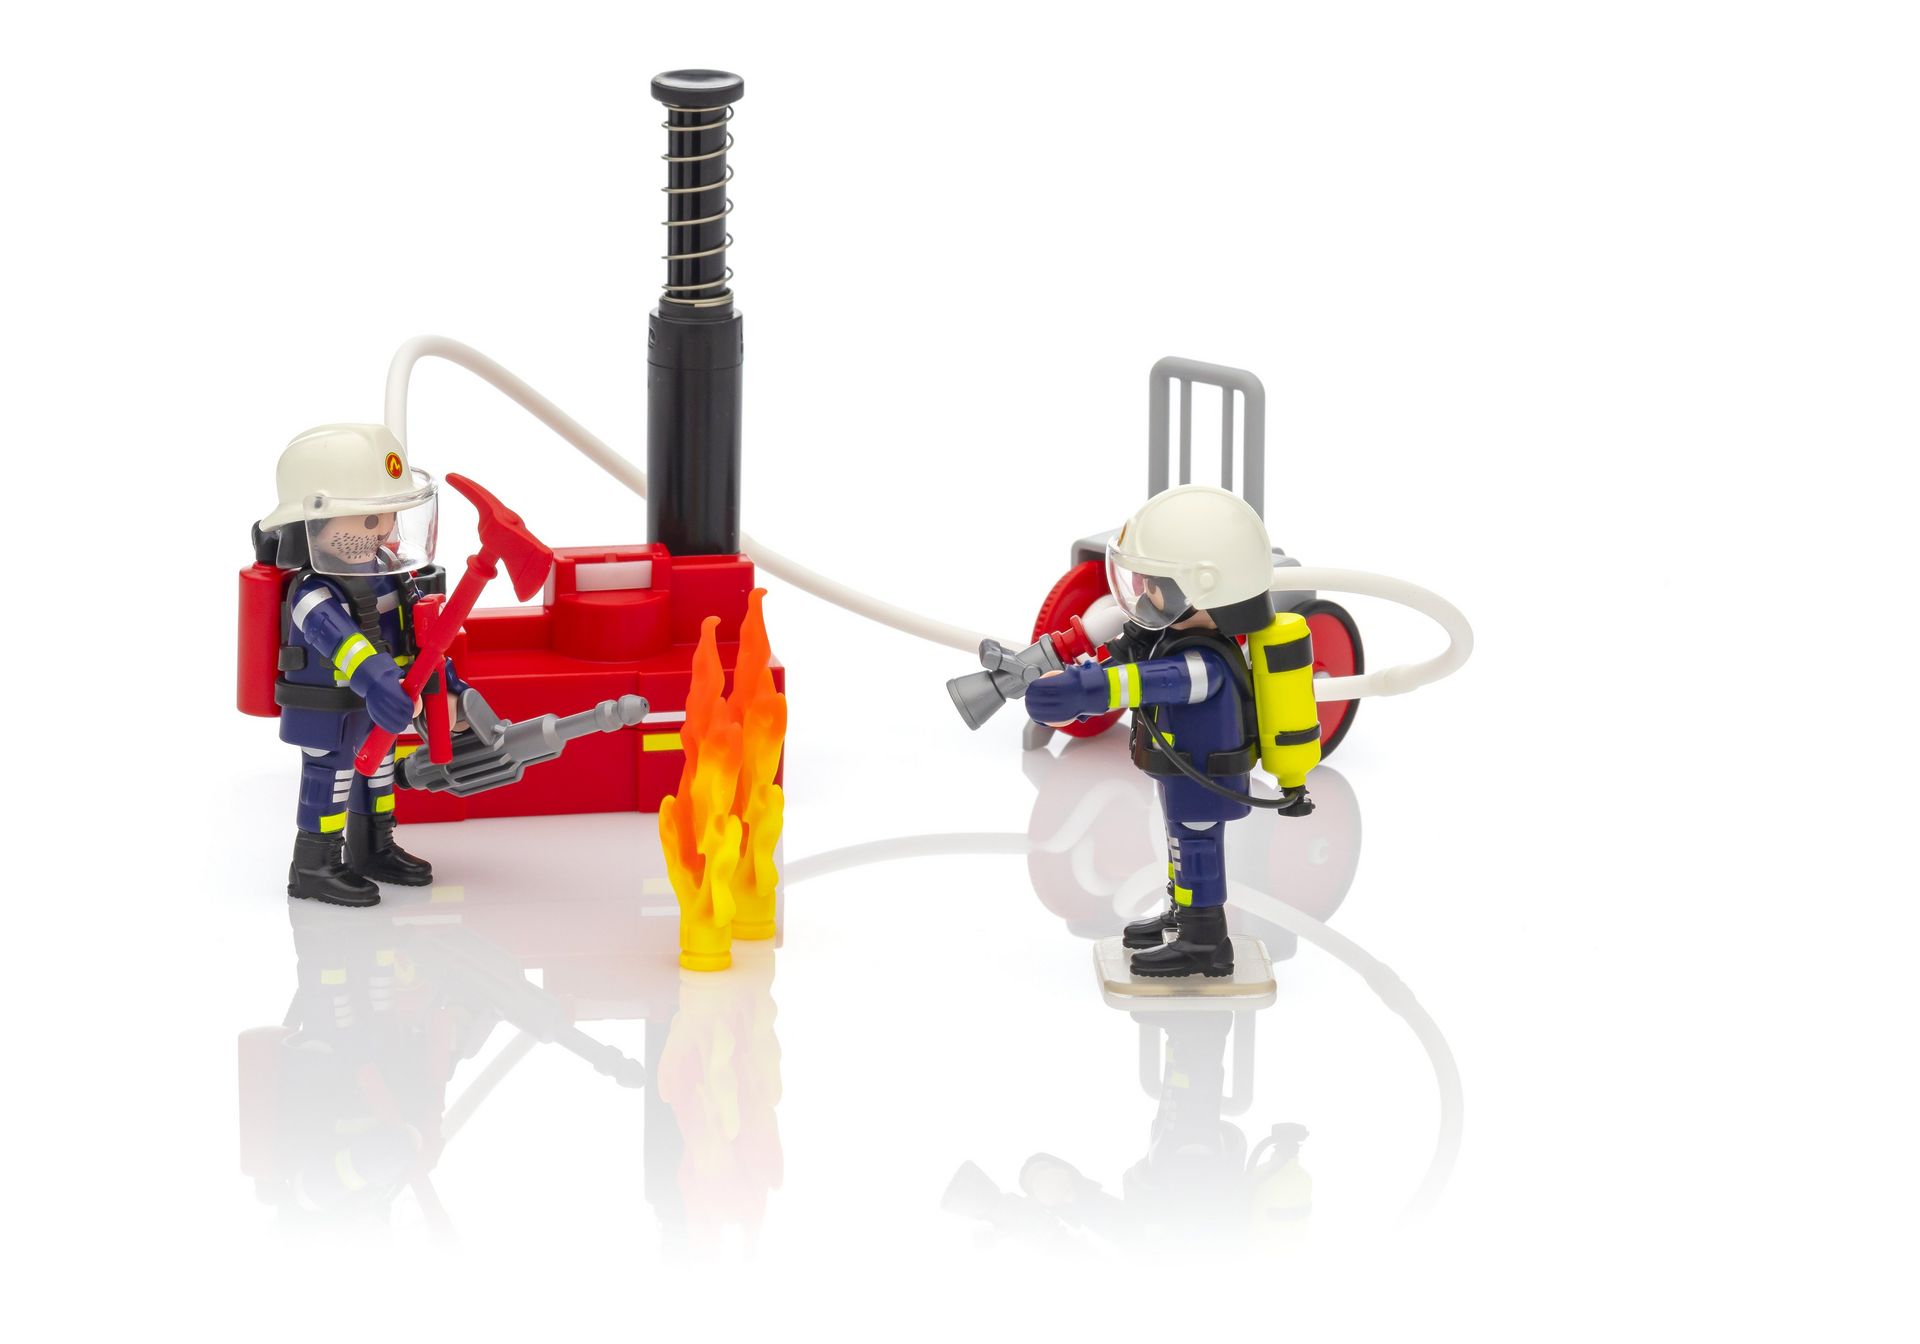 Firefighter with Pump and Accessories Details about   New Playmobil Add-on 6288 